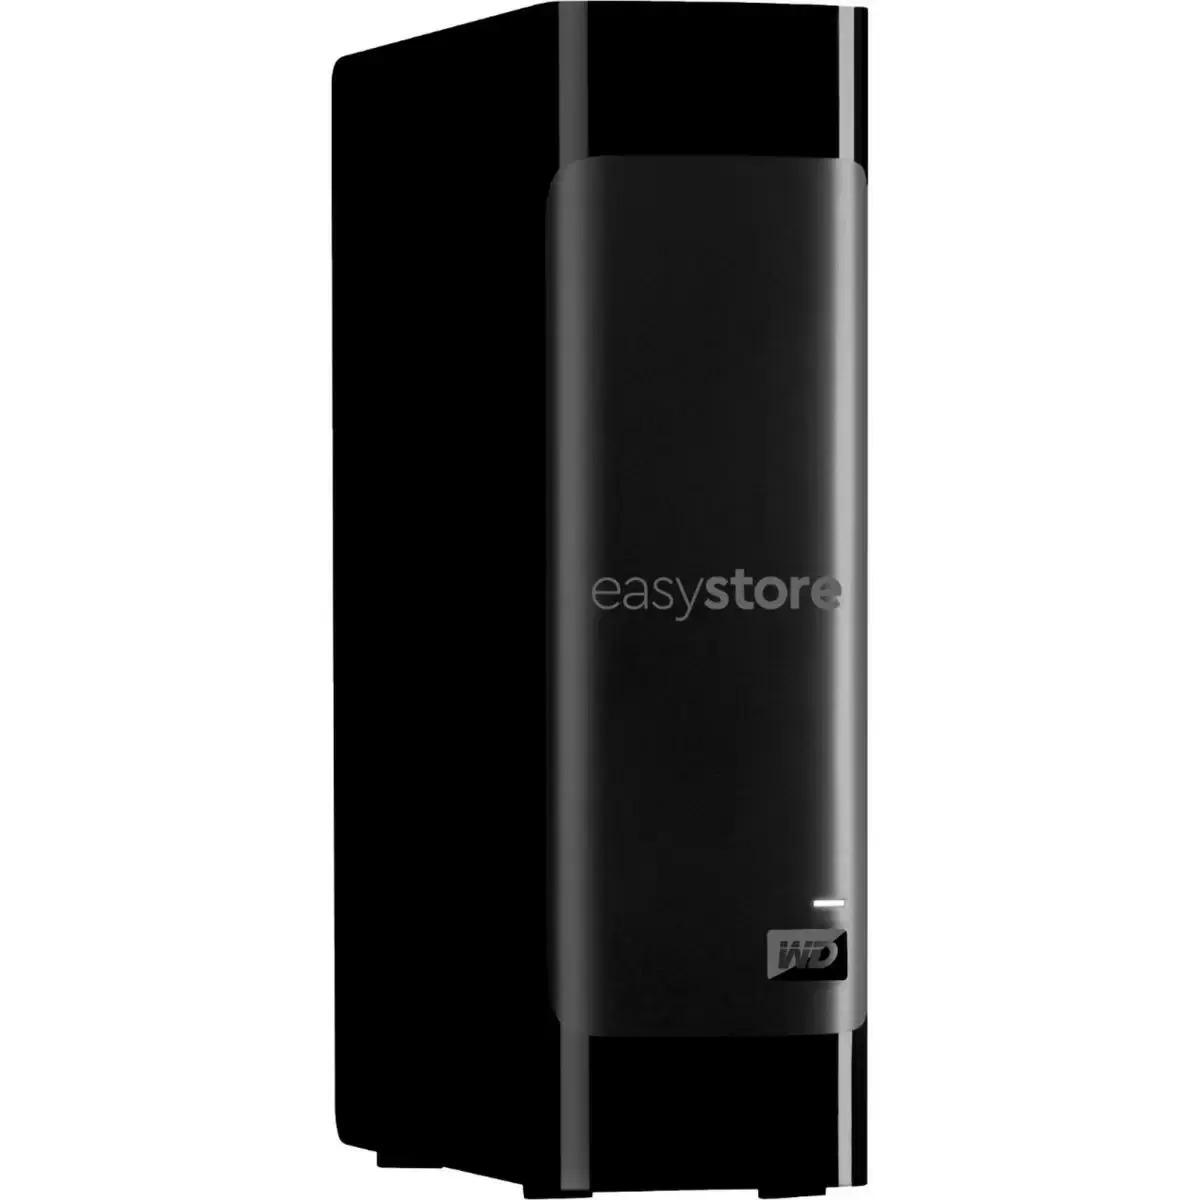 14TB WD easystore USB 3.0 External Hard Drive for $199.99 Shipped